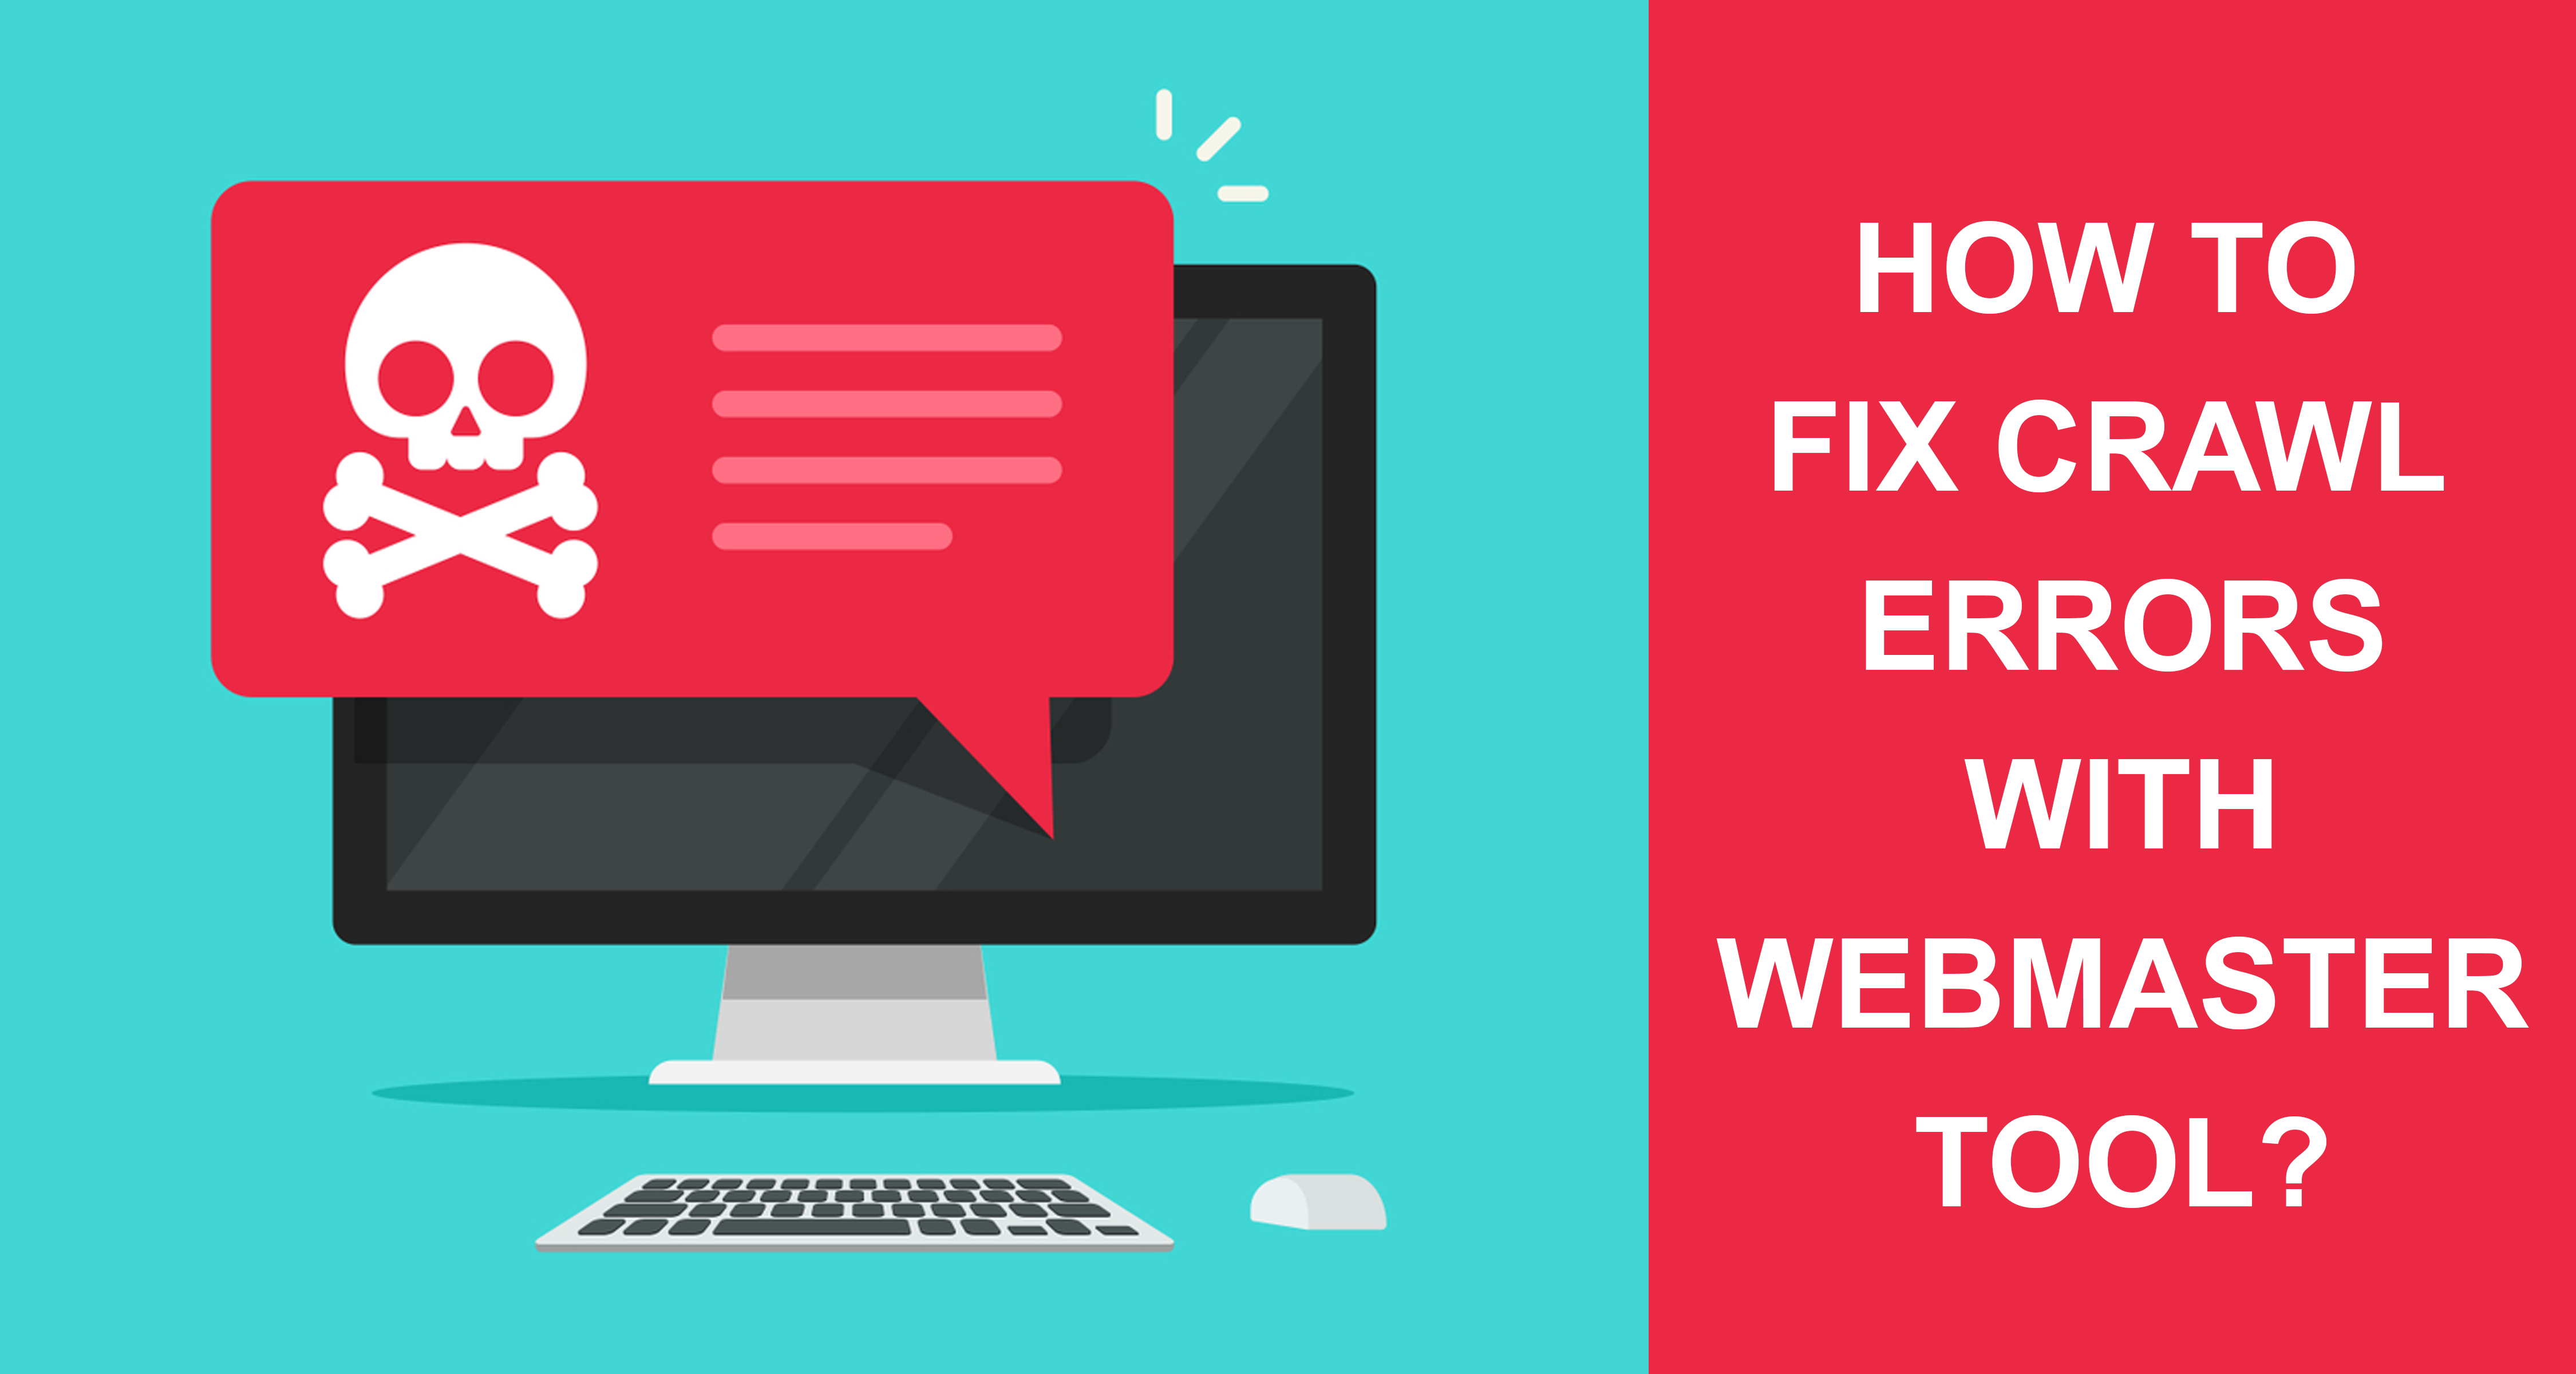 How To Fix Crawl Errors With Webmaster Tool